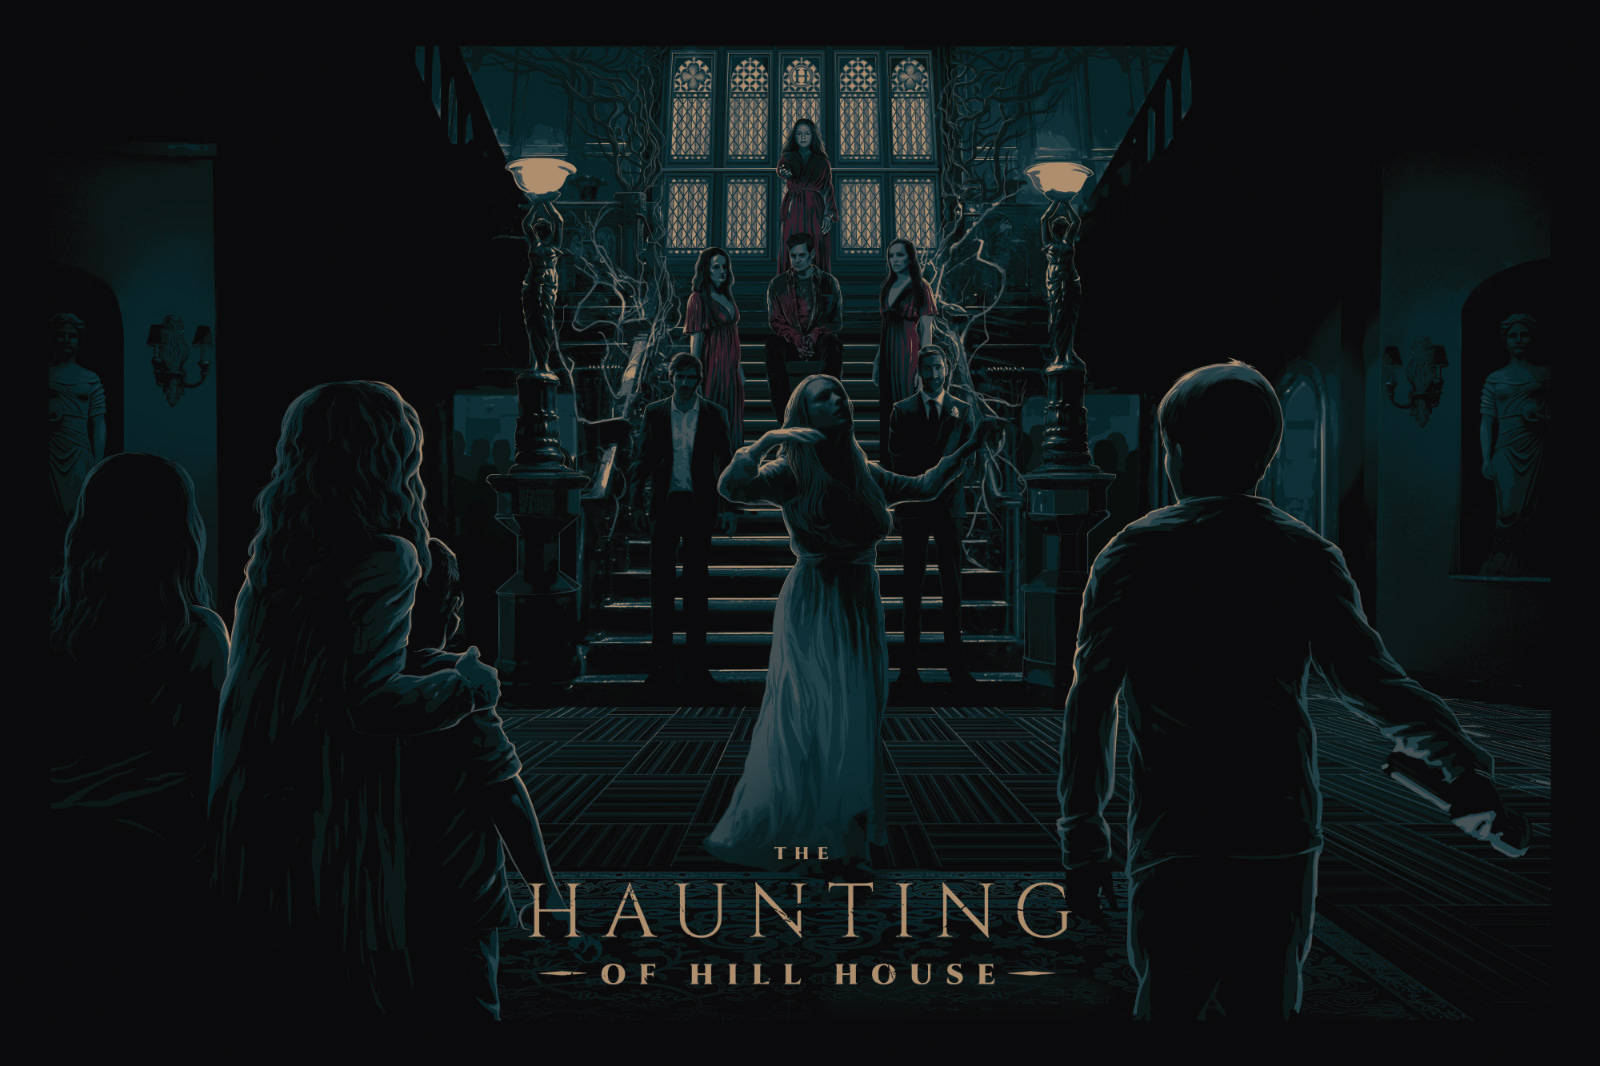 The Haunting Of Hill House Digital Illustration Background